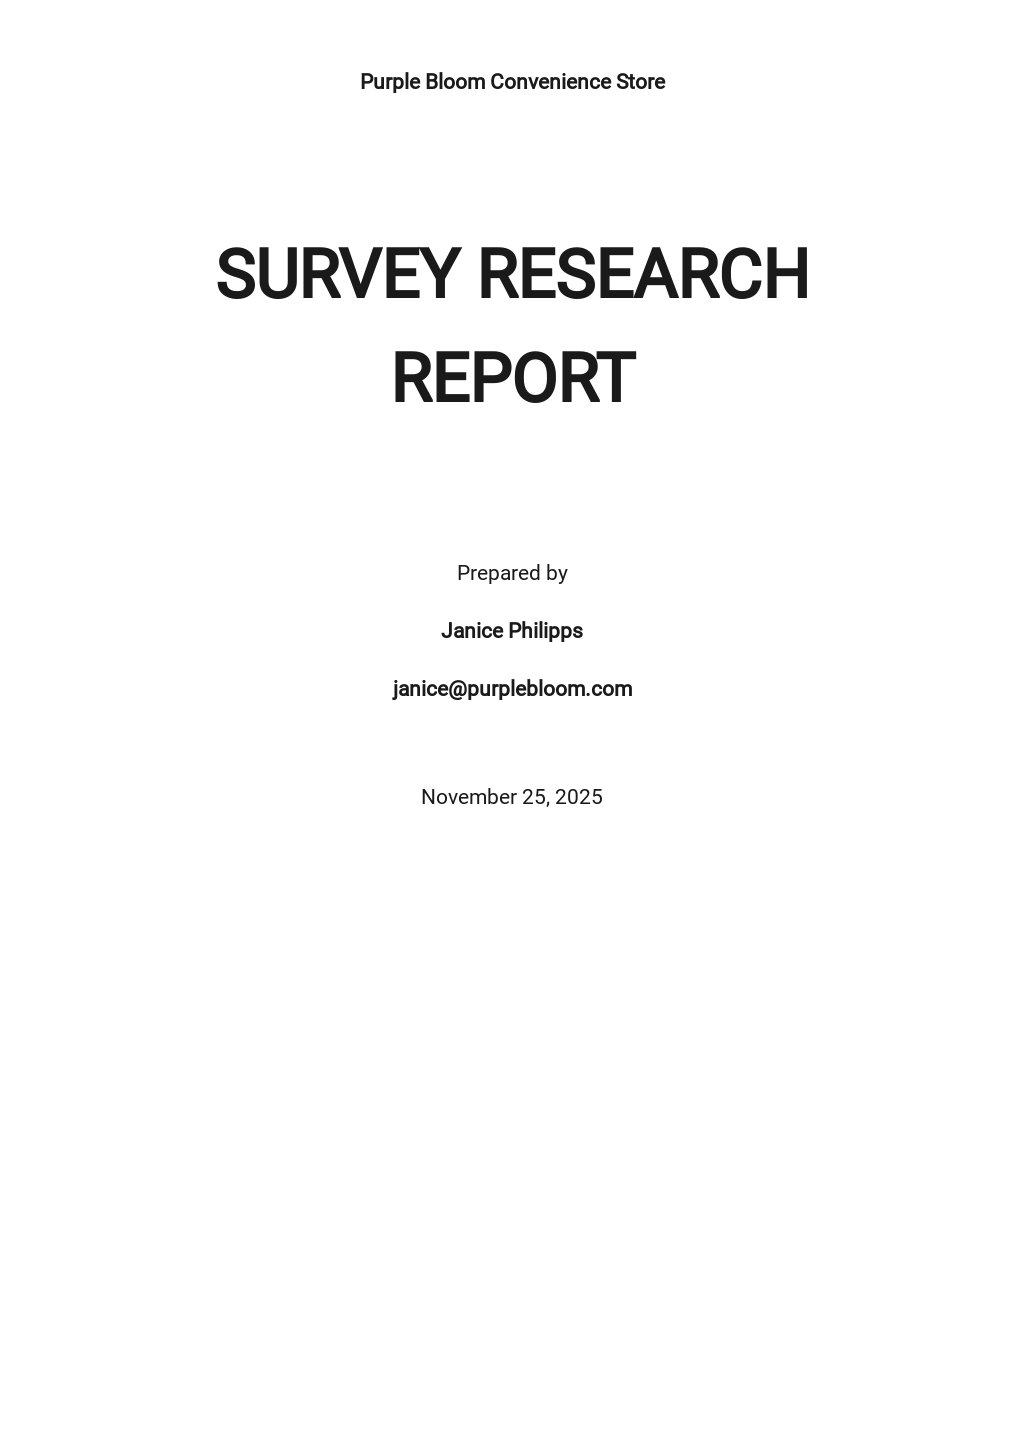 cover page of research report